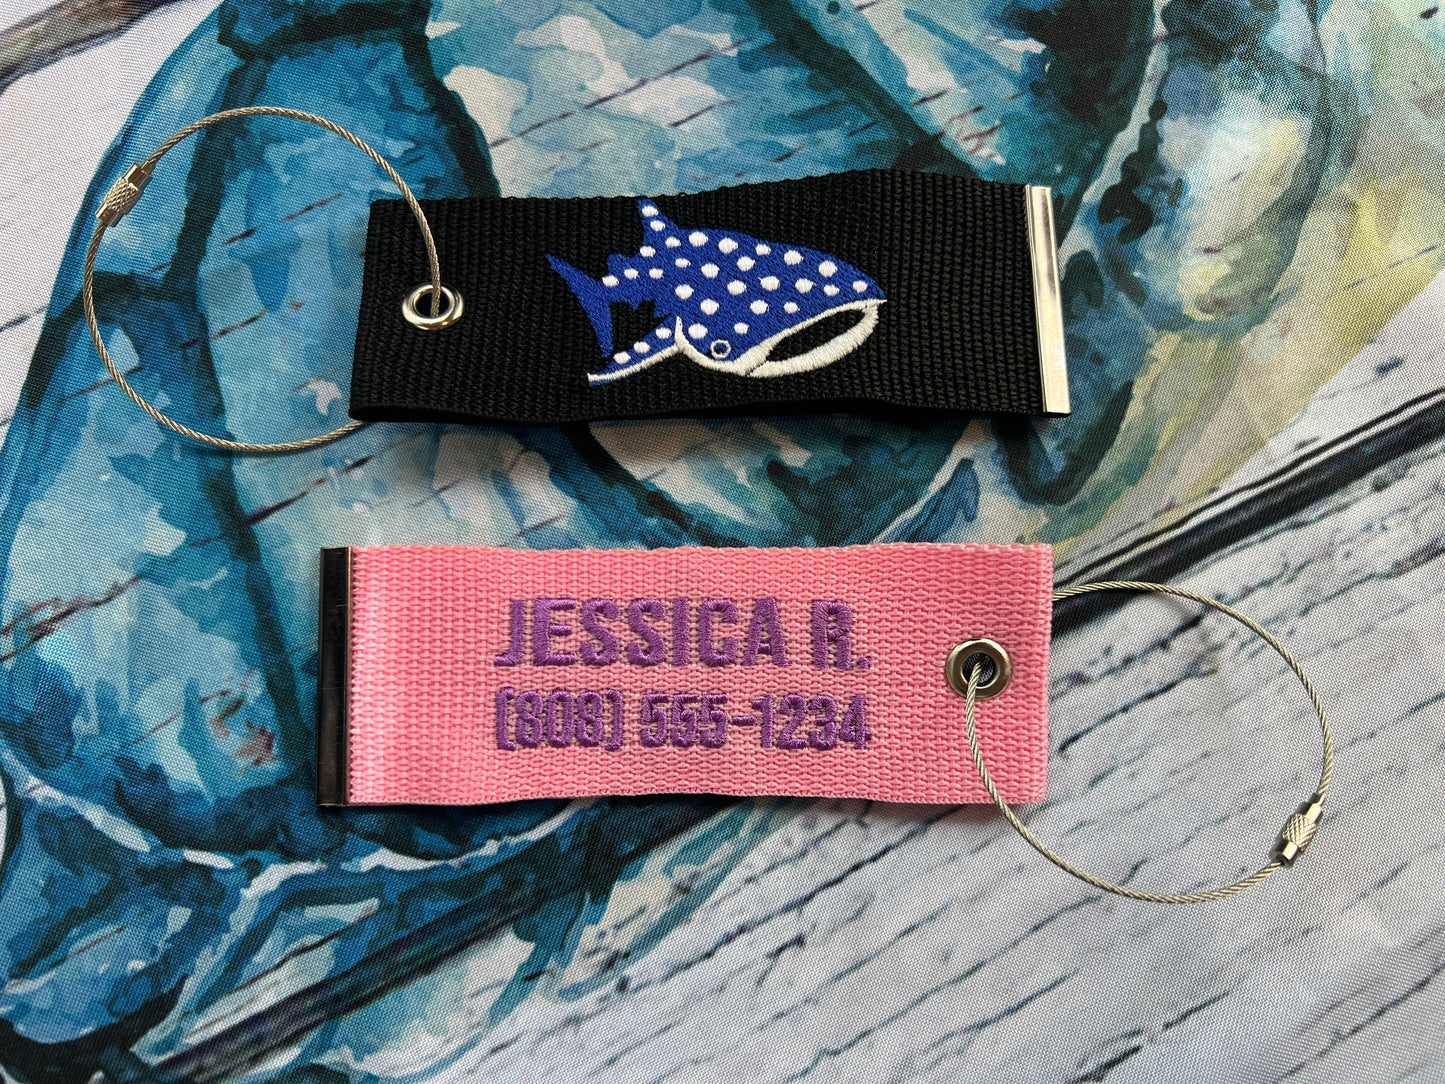 Manta Ray Luggage Tag, Personalized Embroidered Bag Tag for all your Travel needs